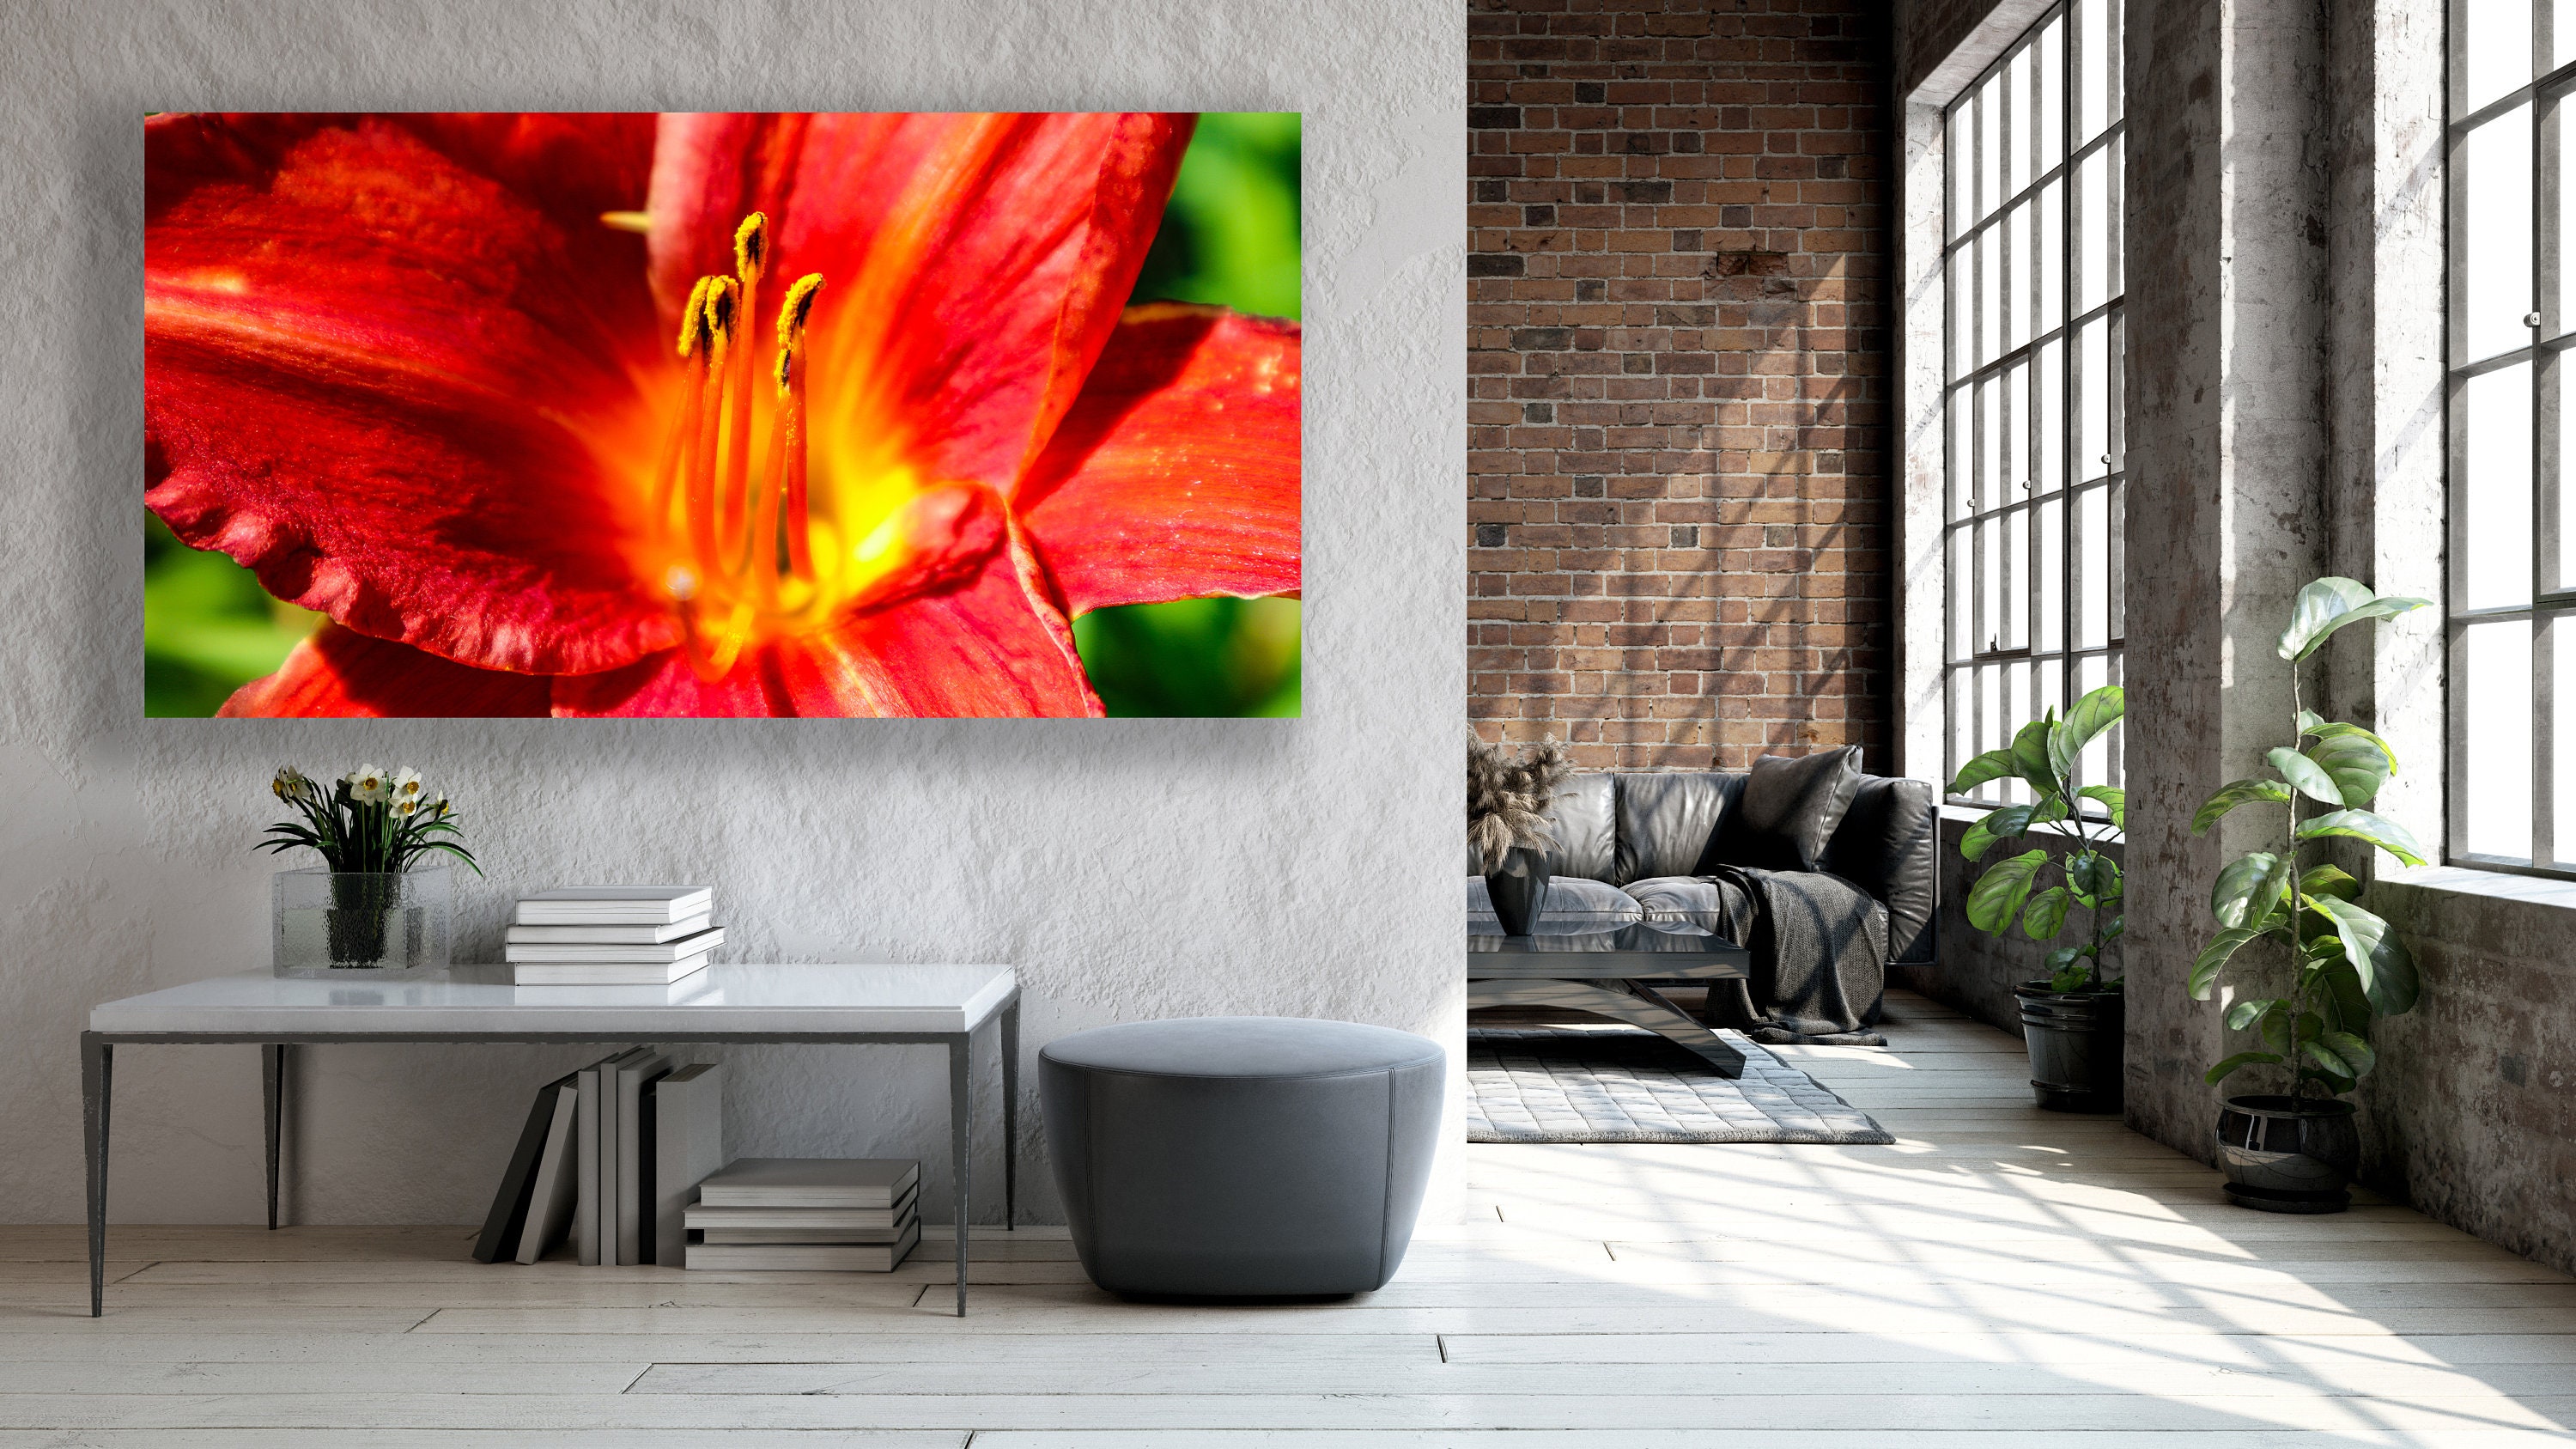 Hera's Gift Day Lily Floral Photo Image Available in Print, Canvas ...